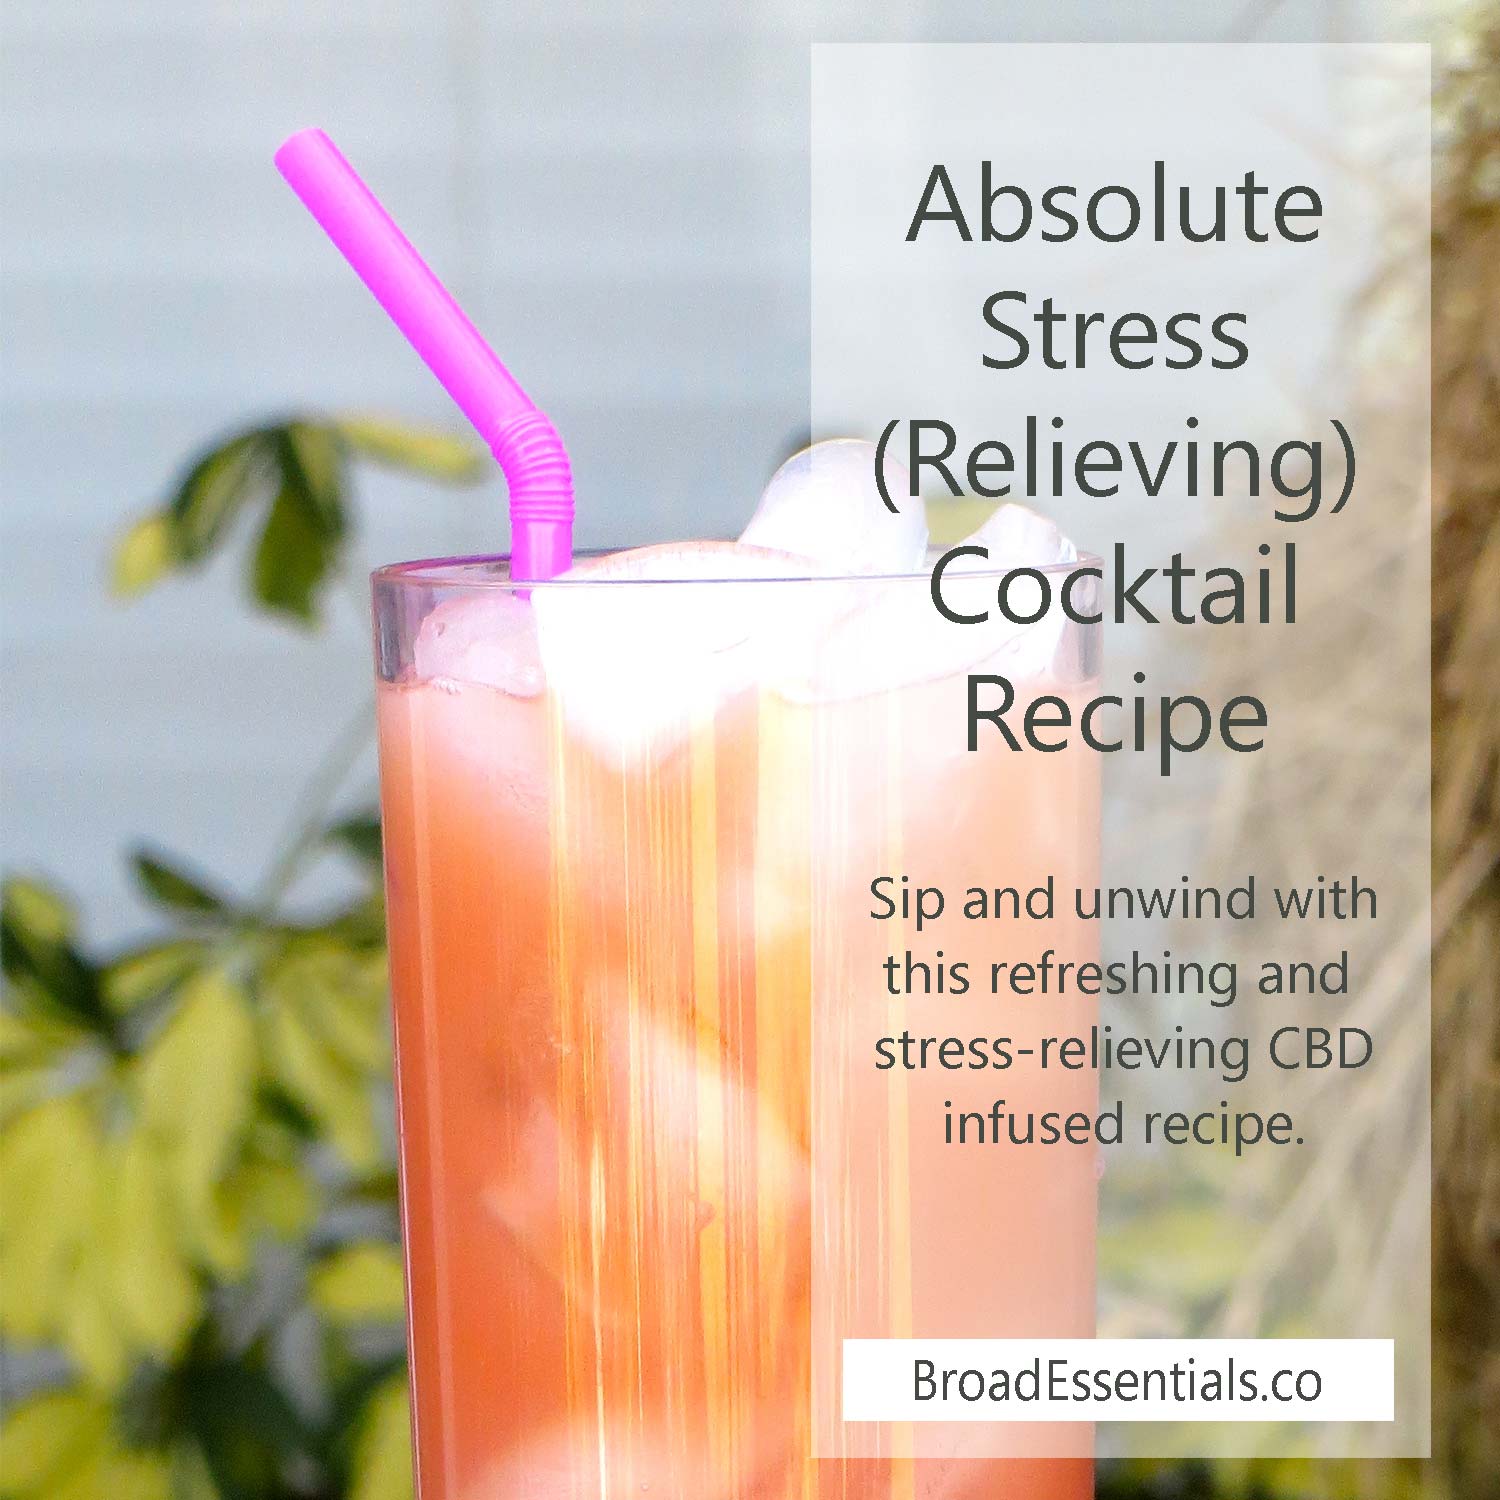 Absolute Stress (Relieving) Cocktail Recipe with CBD